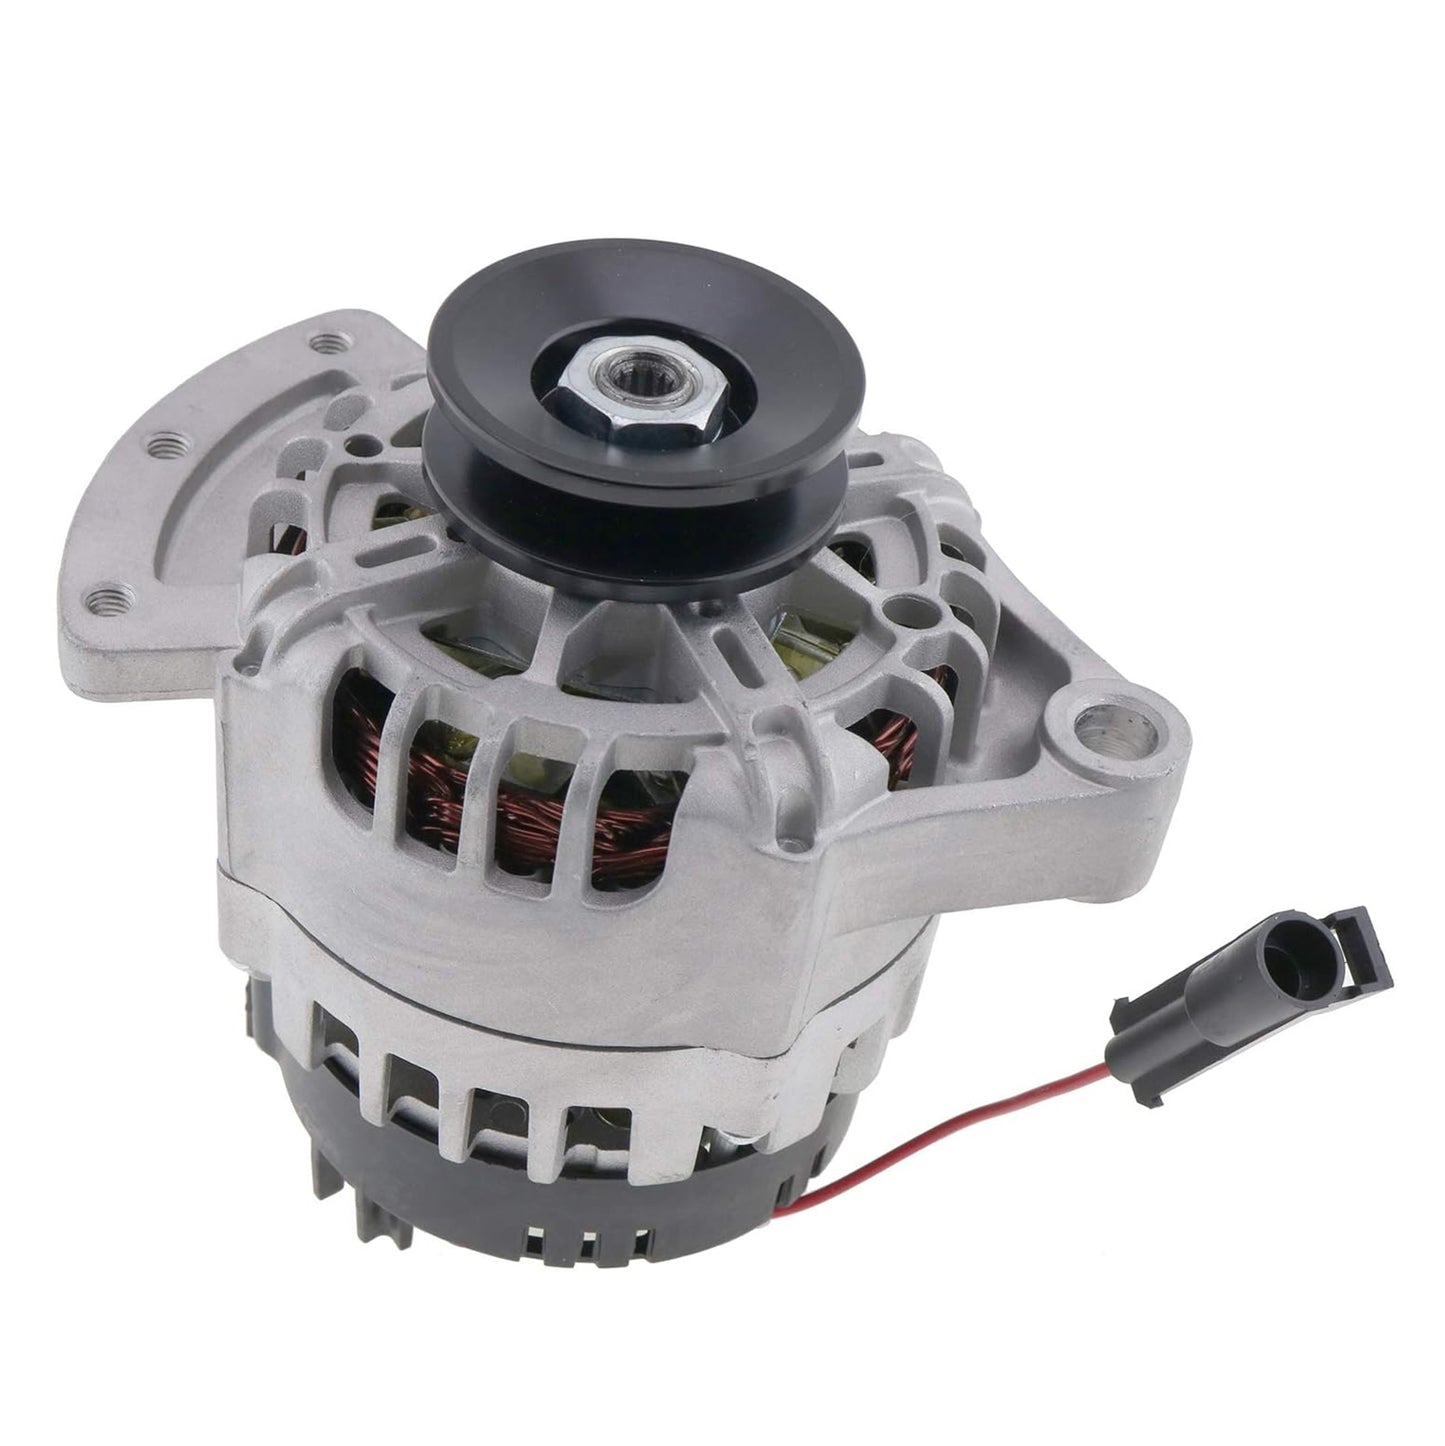 30-01114-06 30-01114-03 30-01114-05 Alternator Compatible with Carrier & Lester 11838